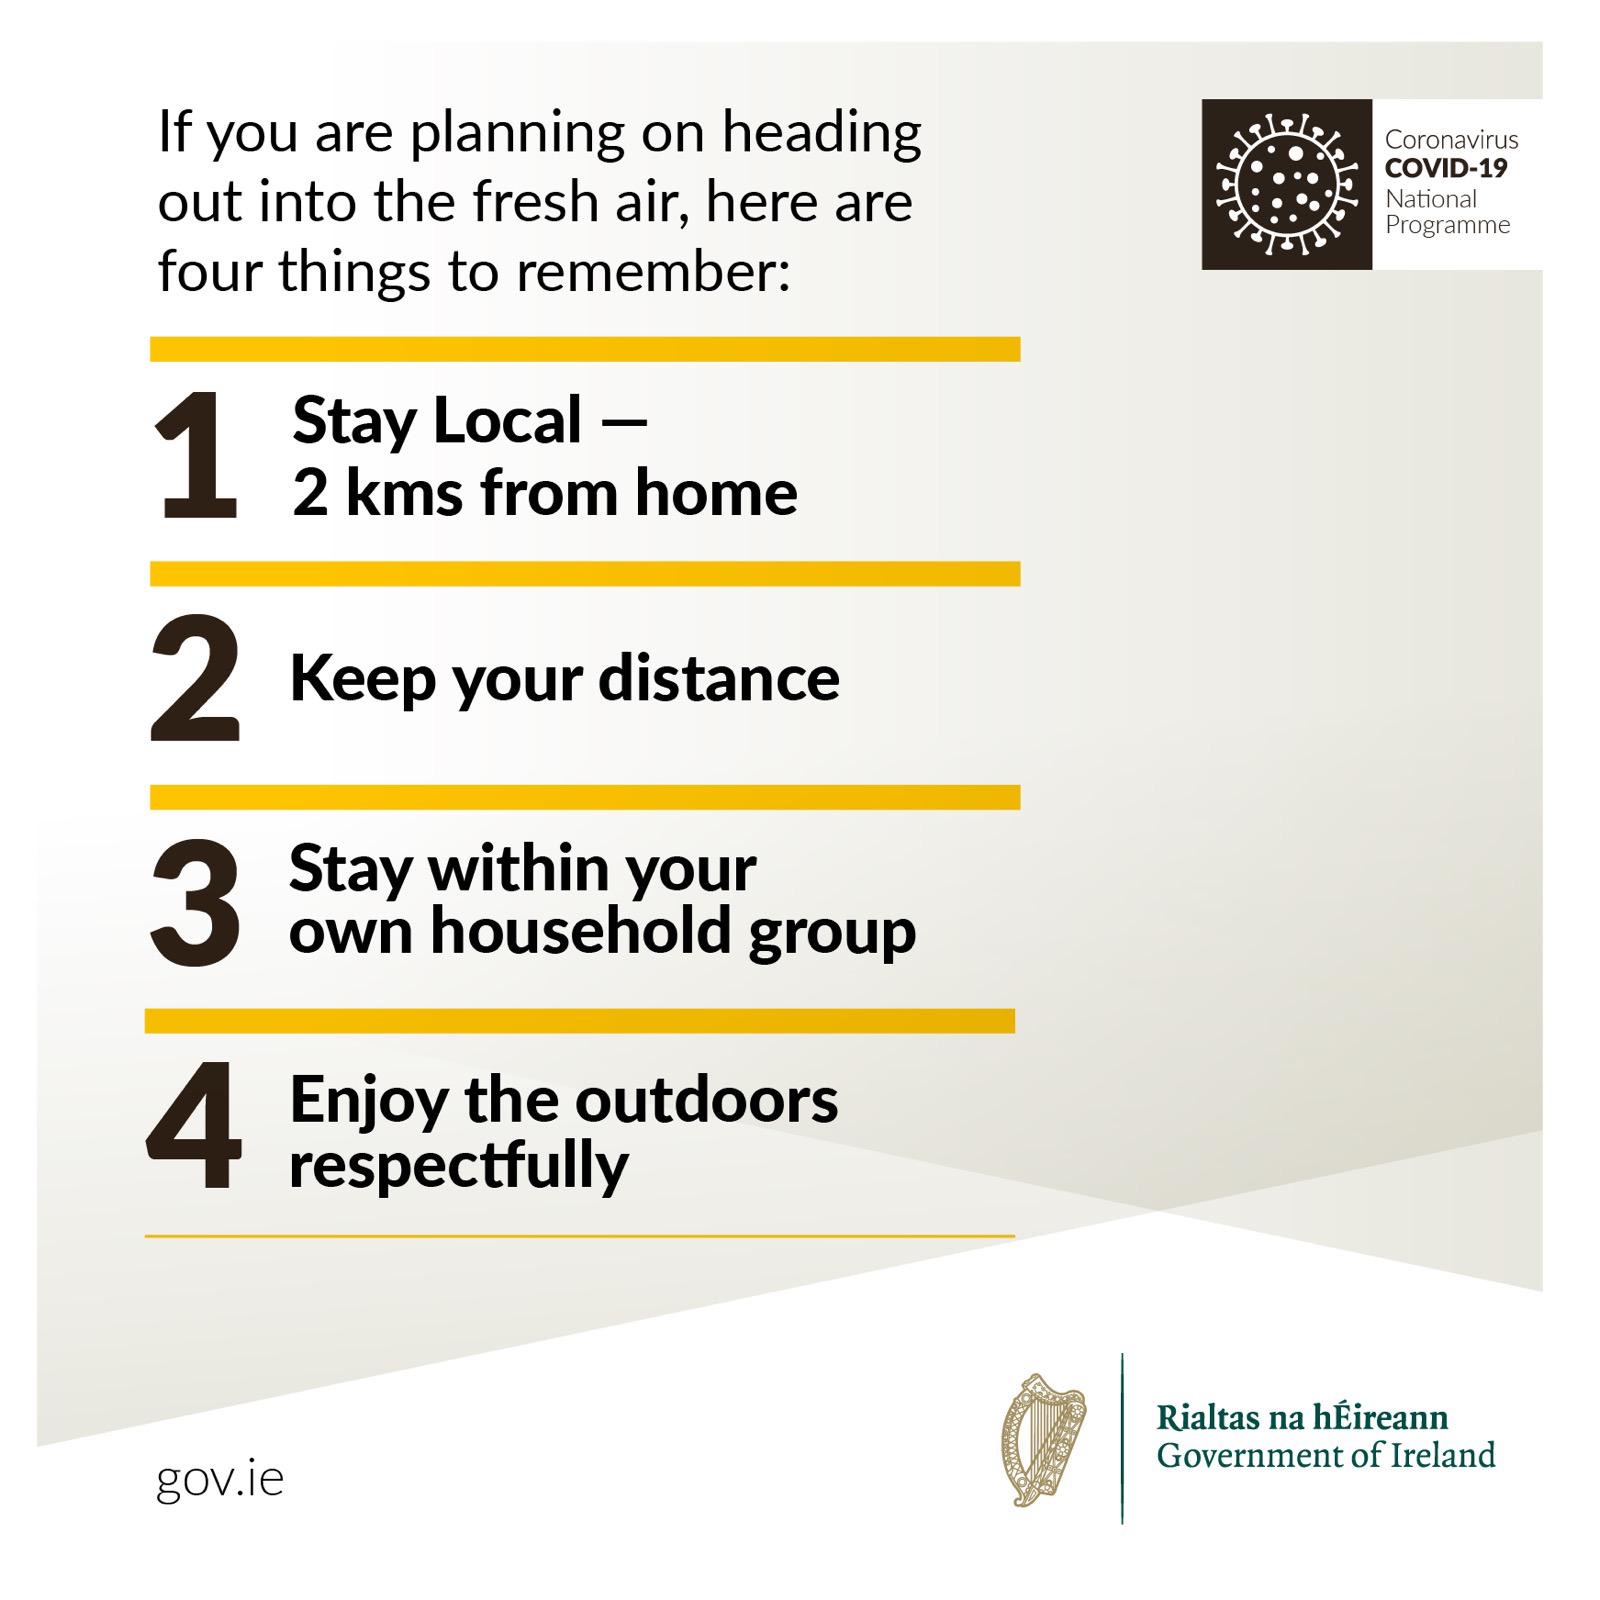 picture telling people to stay local, keep their distance, stay with your won group and use the outdoors respectfully during covid-19